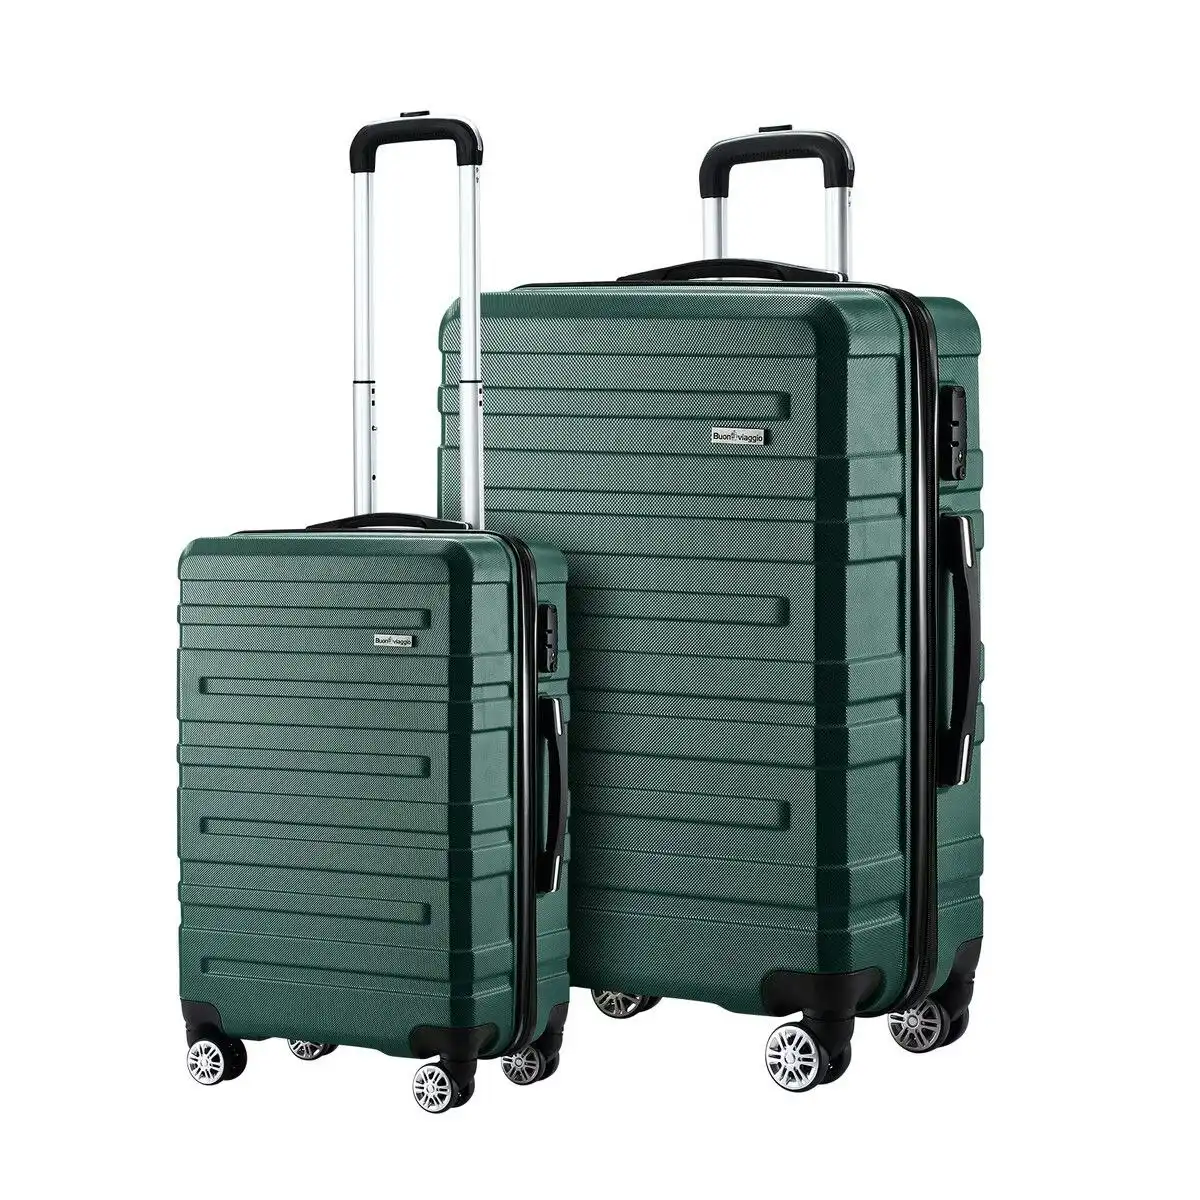 Buon Viaggio 2 Piece Suitcases Luggage Set Carry On Travel Case Cabin Hard Shell Travelling Baggage Expandable Lightweight Rolling TSA Lock Green